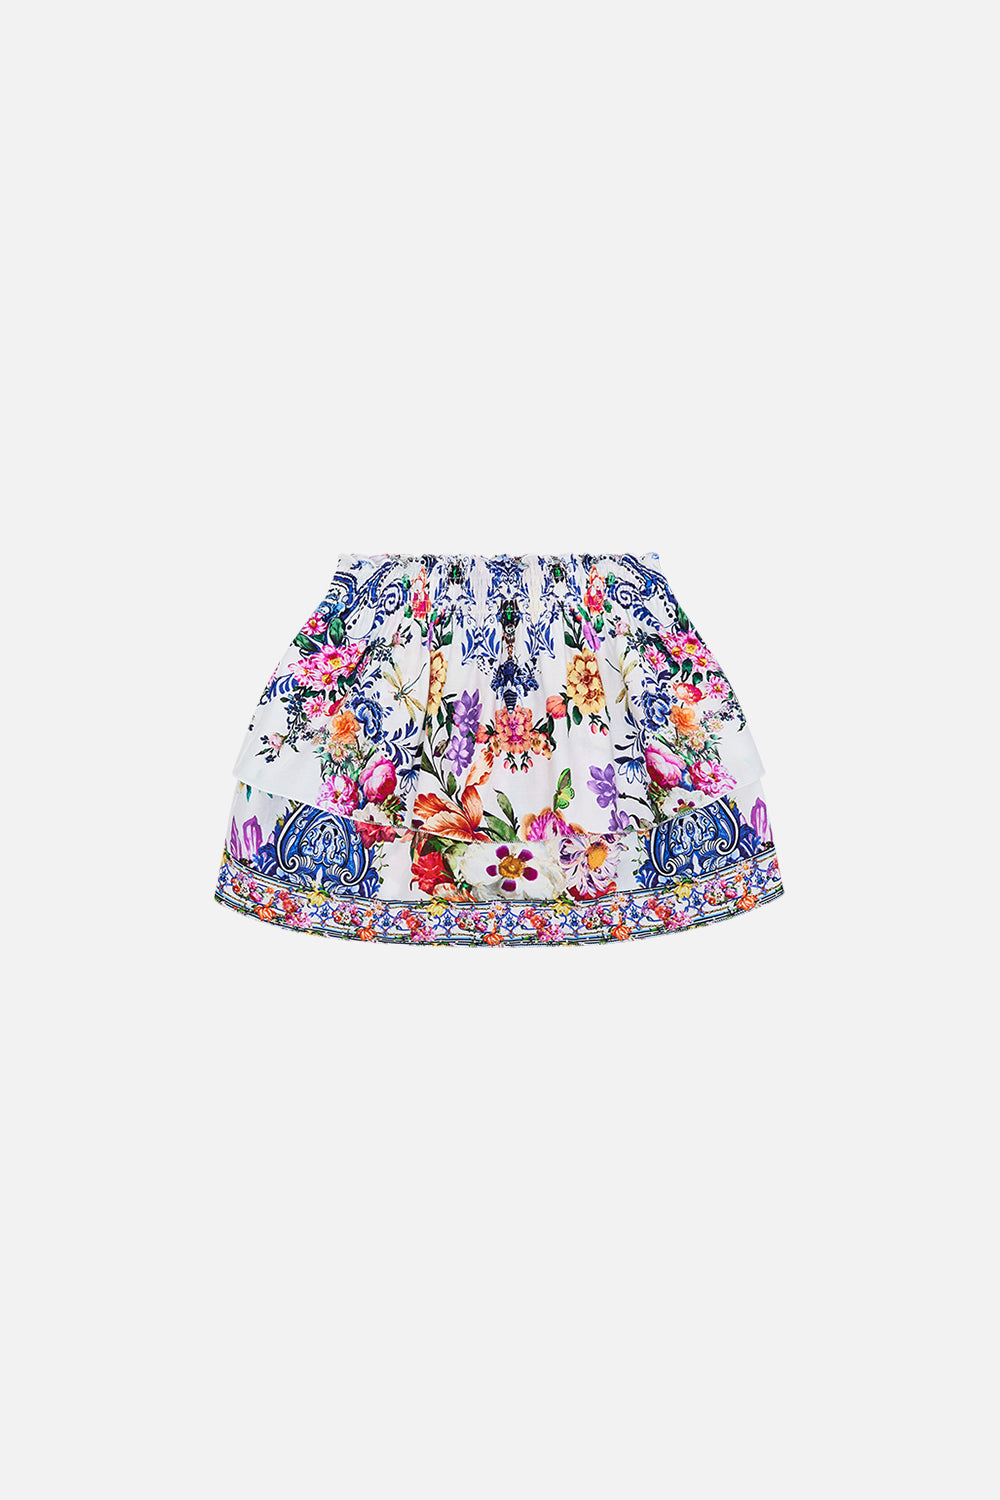 Front product view of Milla By CAMILLA kids mini skirt in Glaze and Graze print 